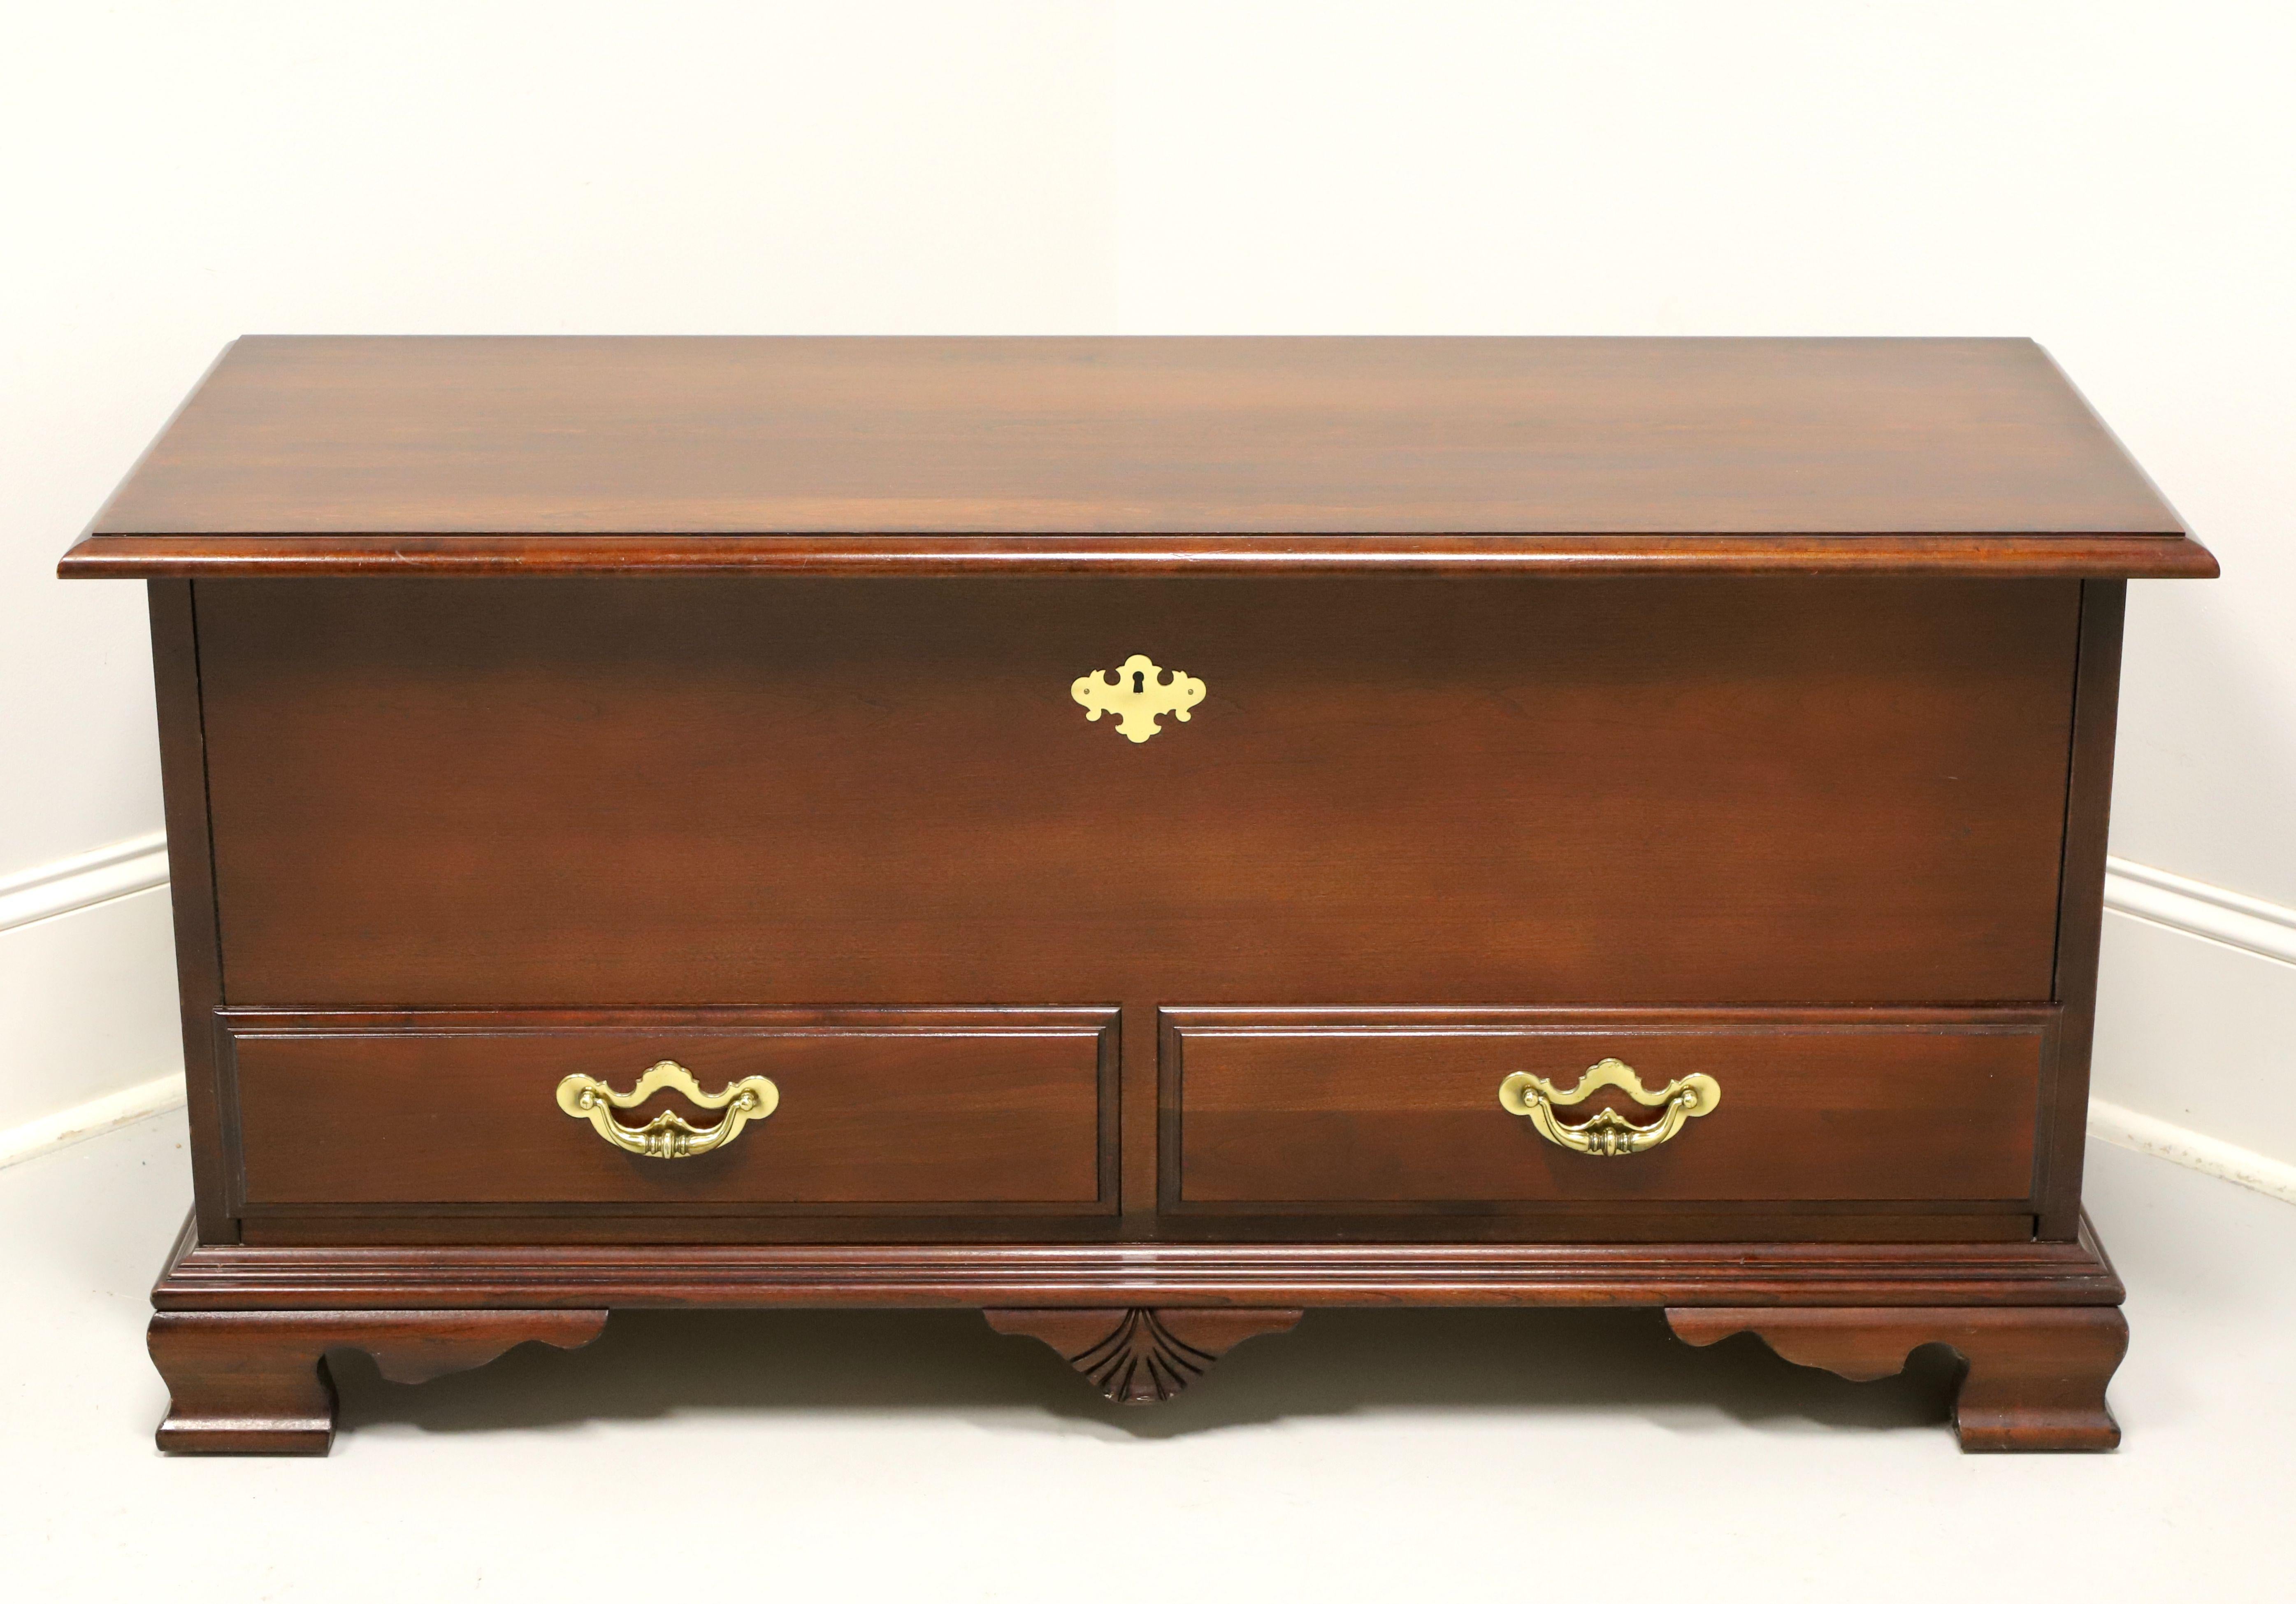 A Chippendale style blanket chest by Thomasville, from their Collectors Cherry Collection. Cherry wood with brass hardware, bevel edge to the lid top, faux drawer fronts, faux keyhole escutcheon, and ogee bracket feet. Features an ample cedar lined